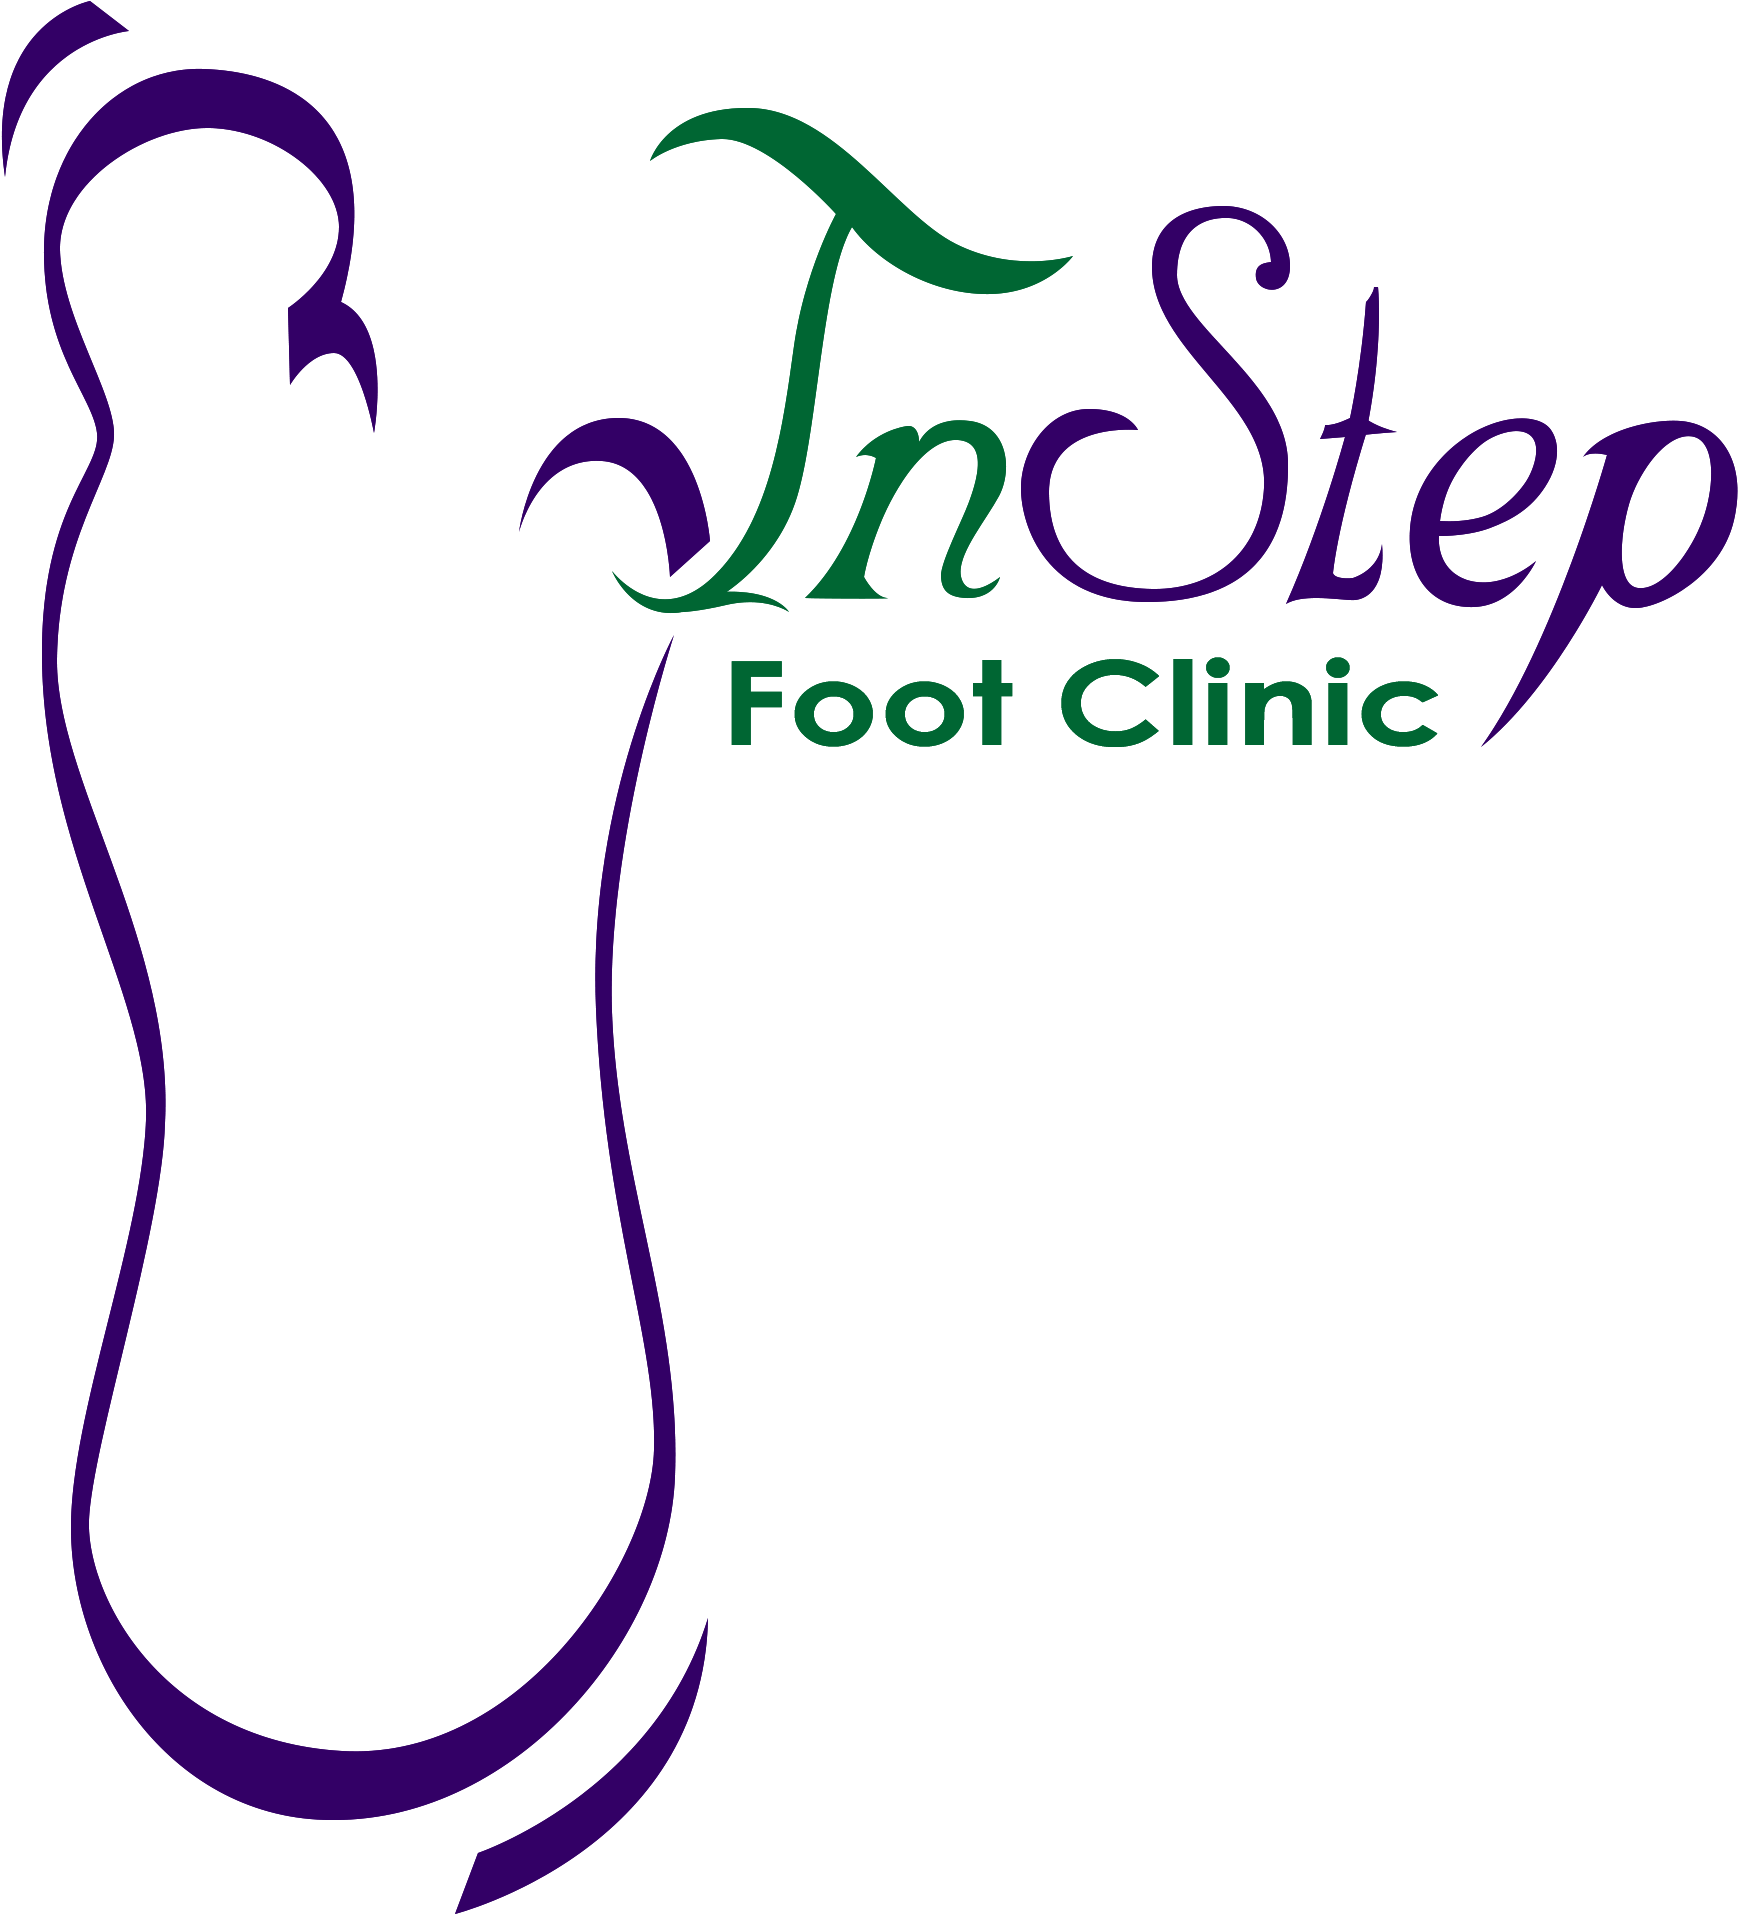 Instep Foot Clinic - Foot Instep (1772x1923)